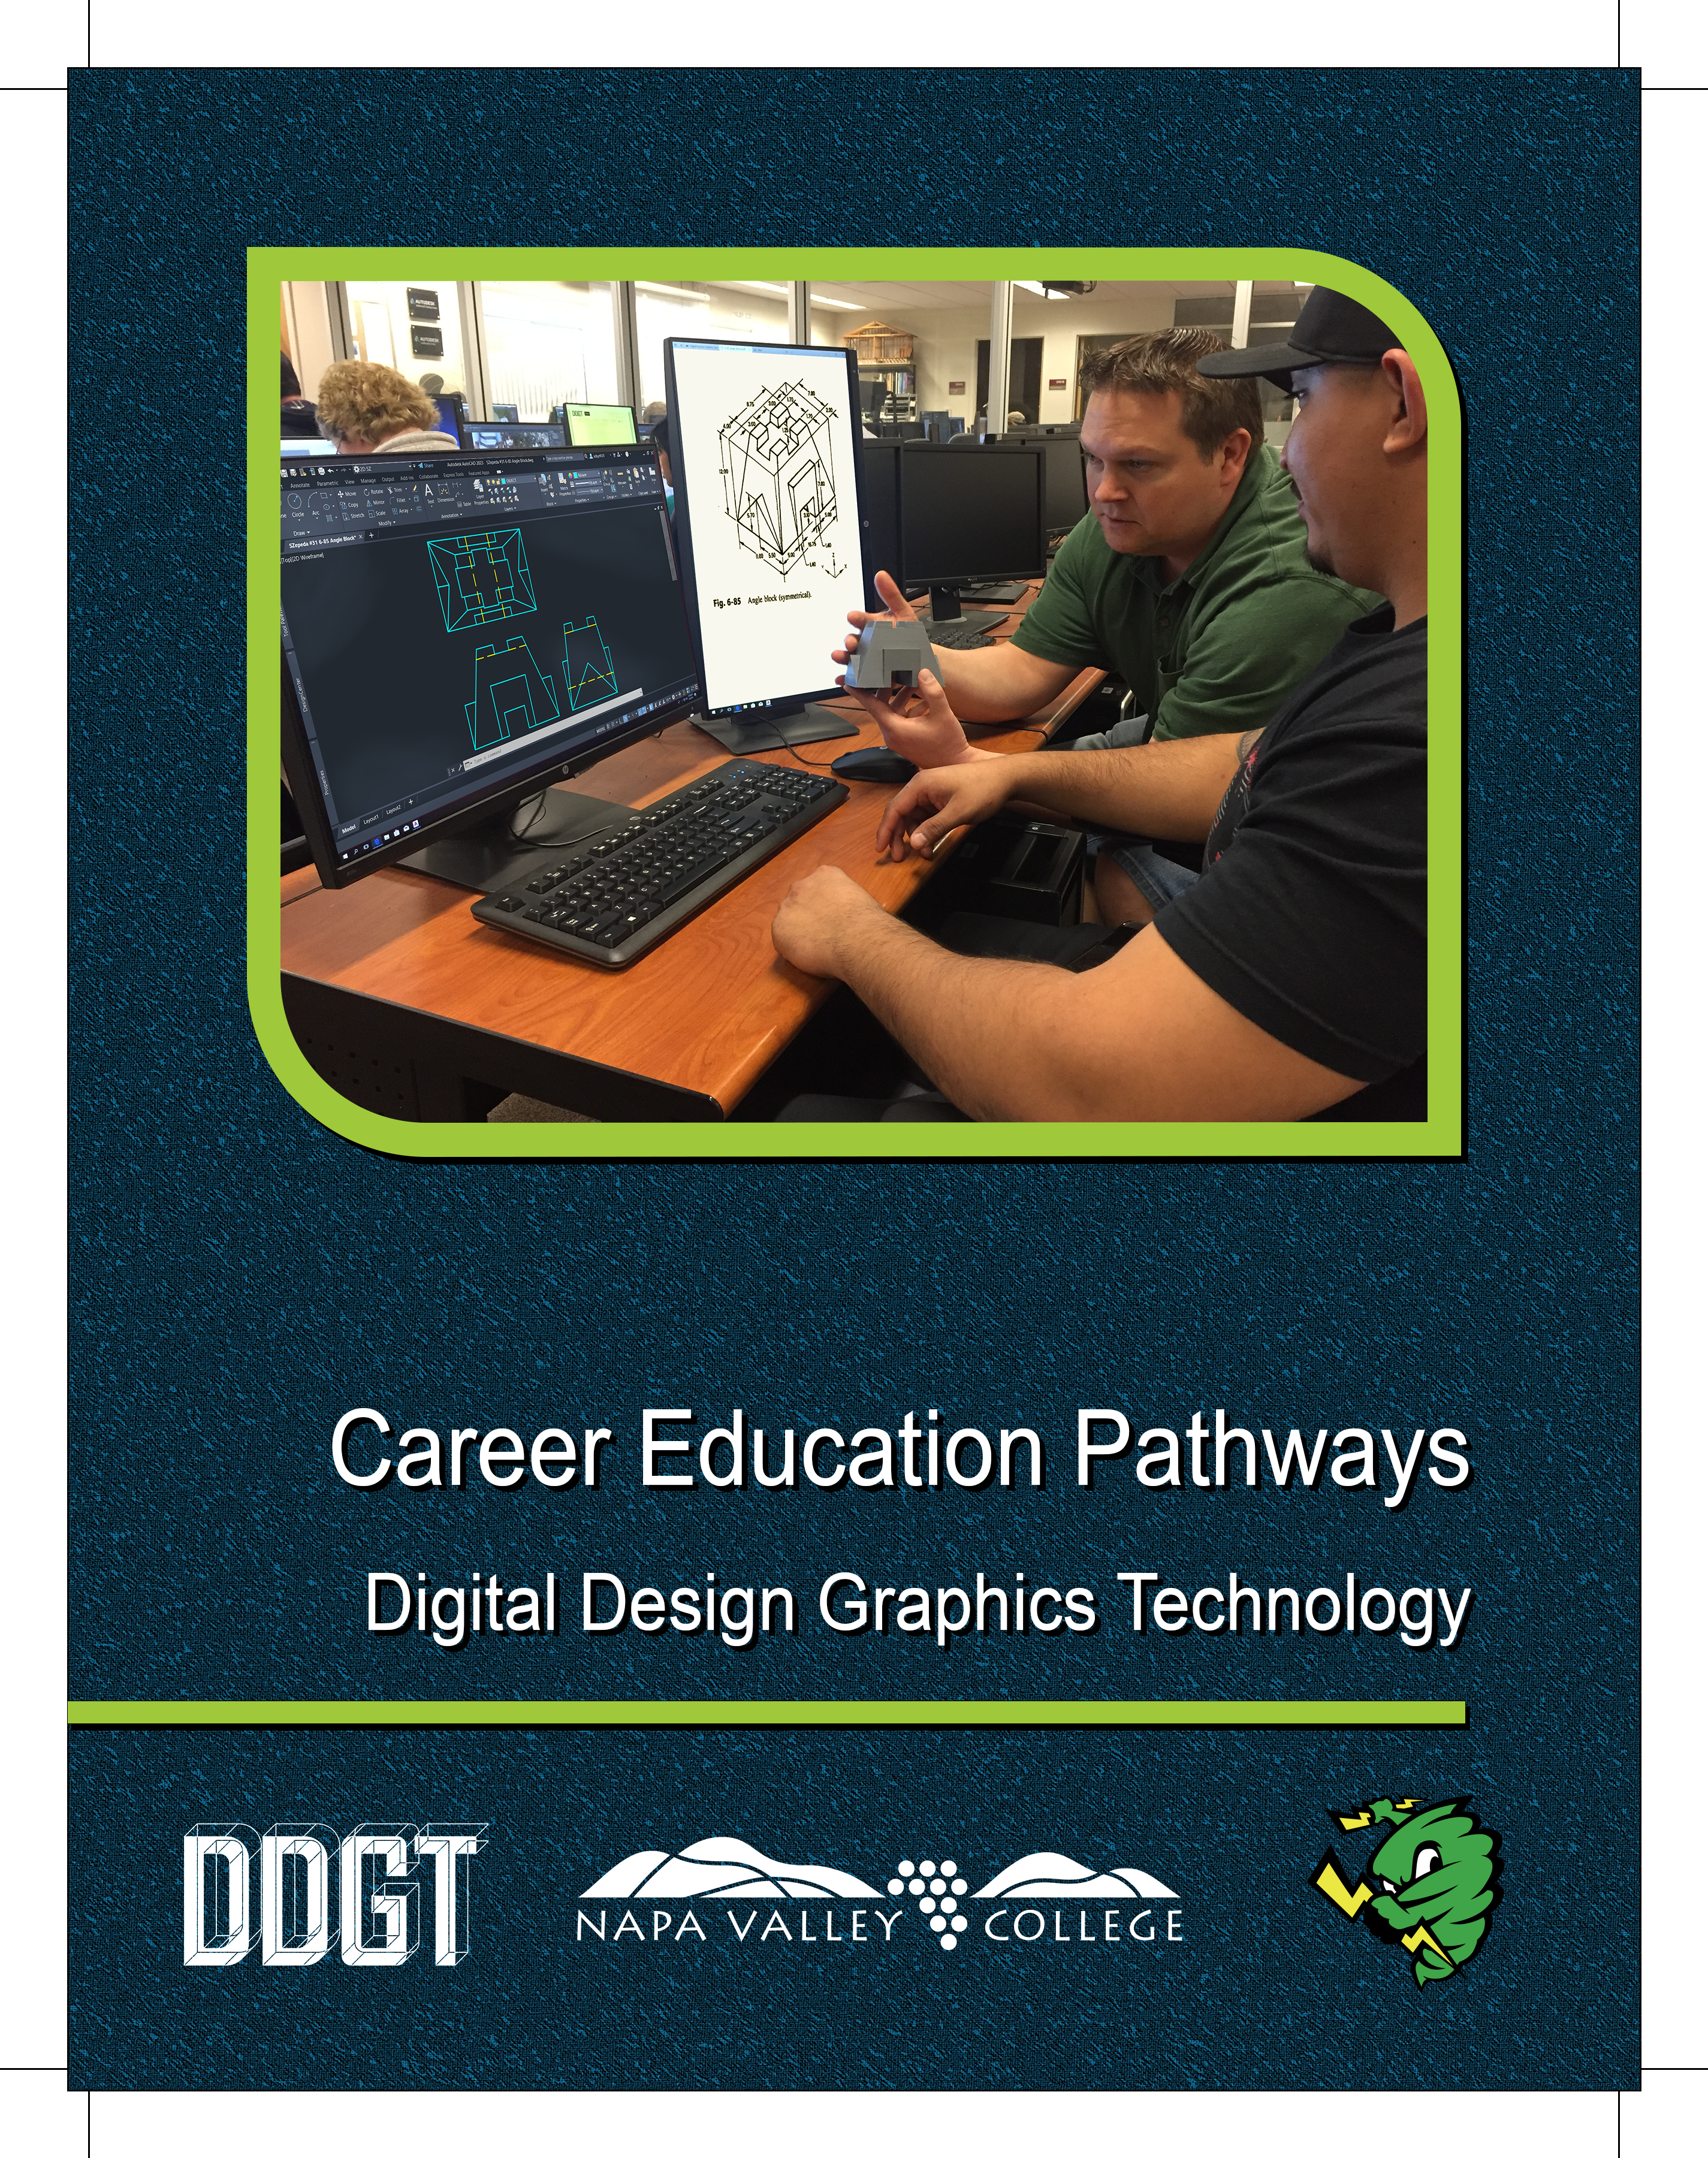 Advertisment poster for DDGT class